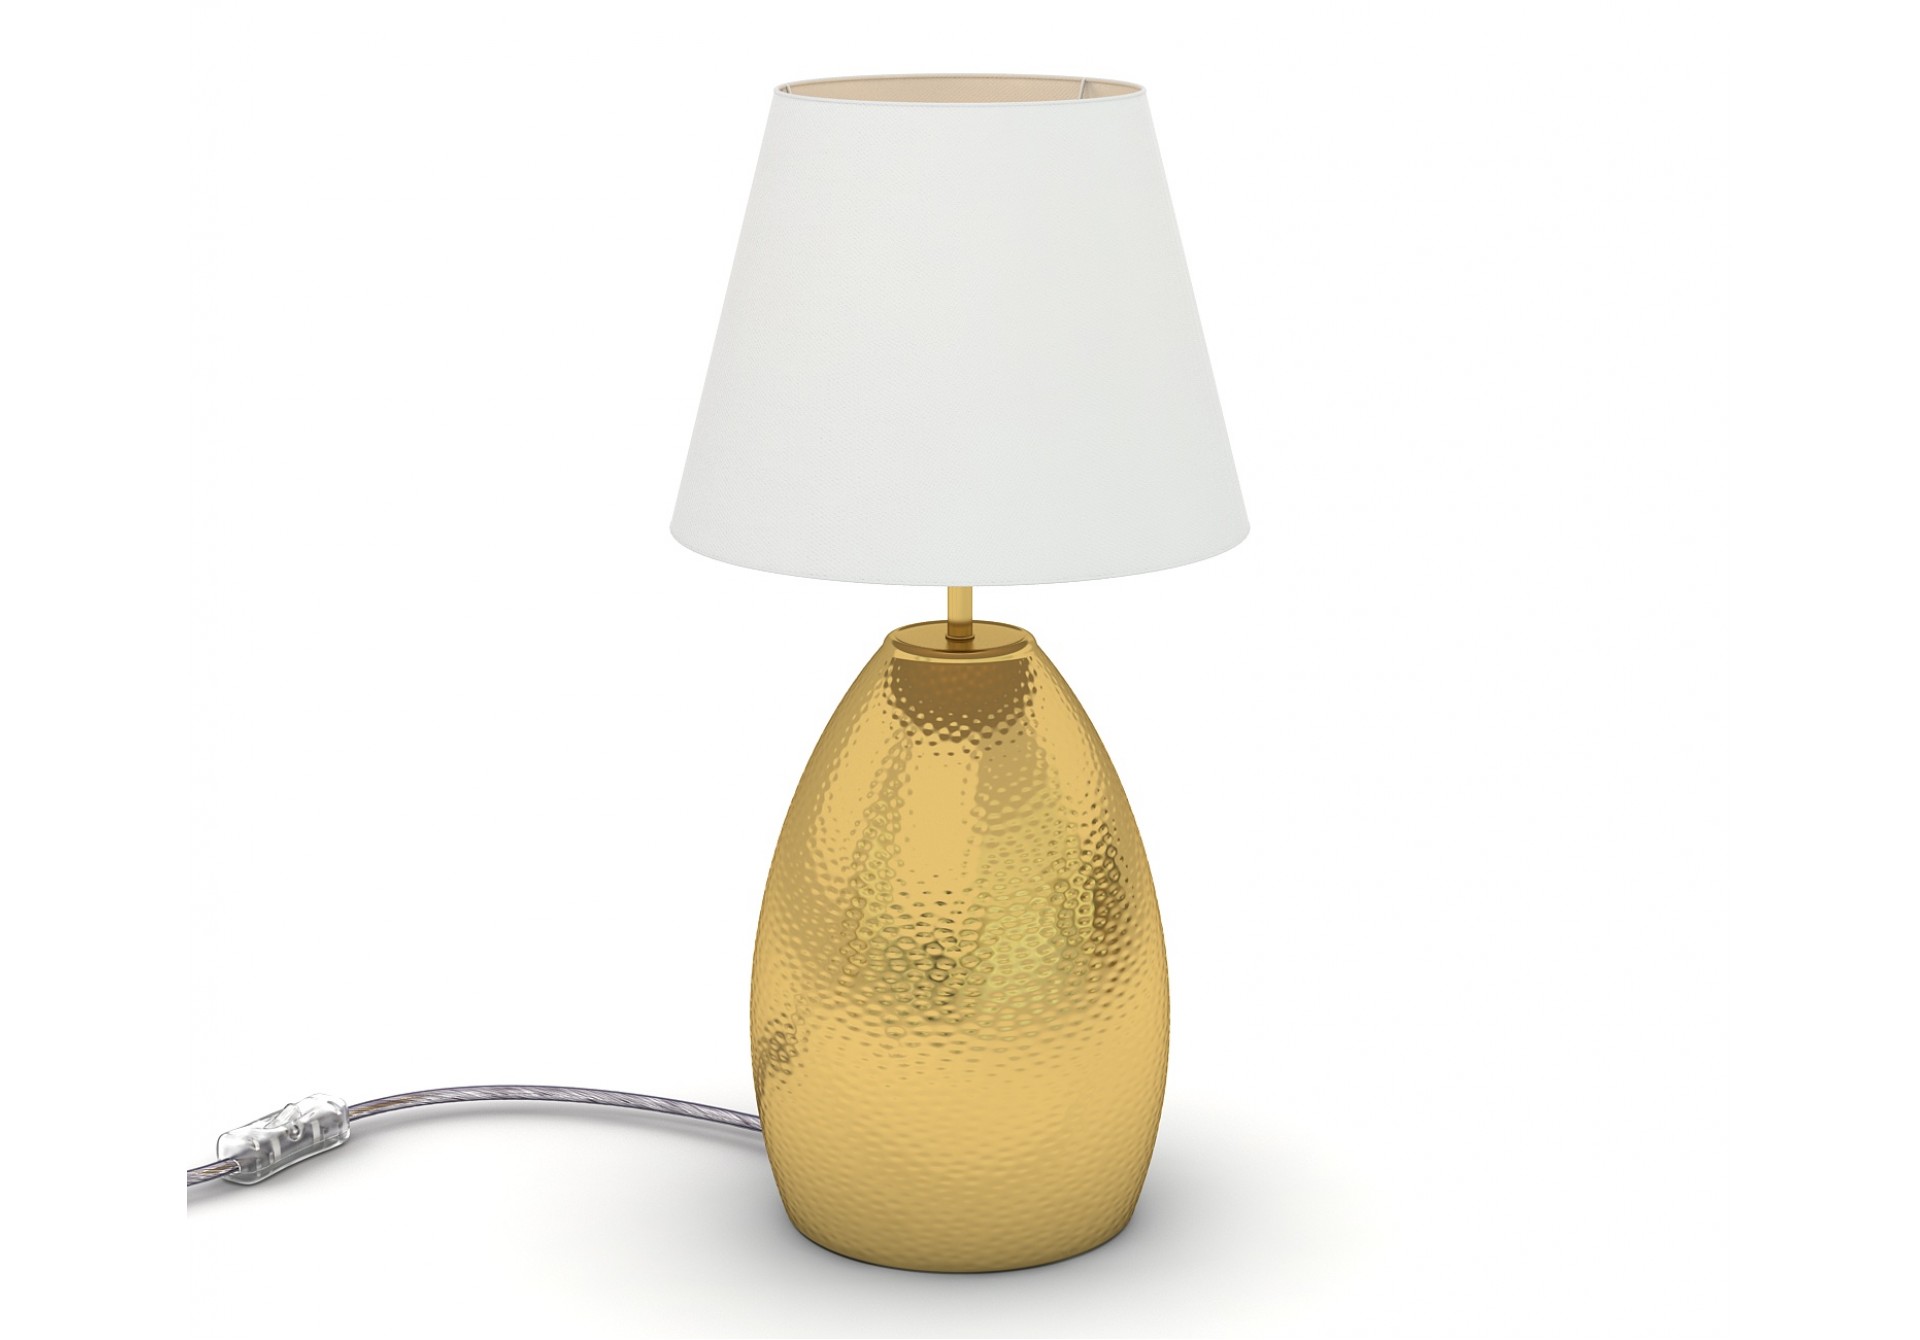 Cobb Metal Golden Table Lamp With White Shade